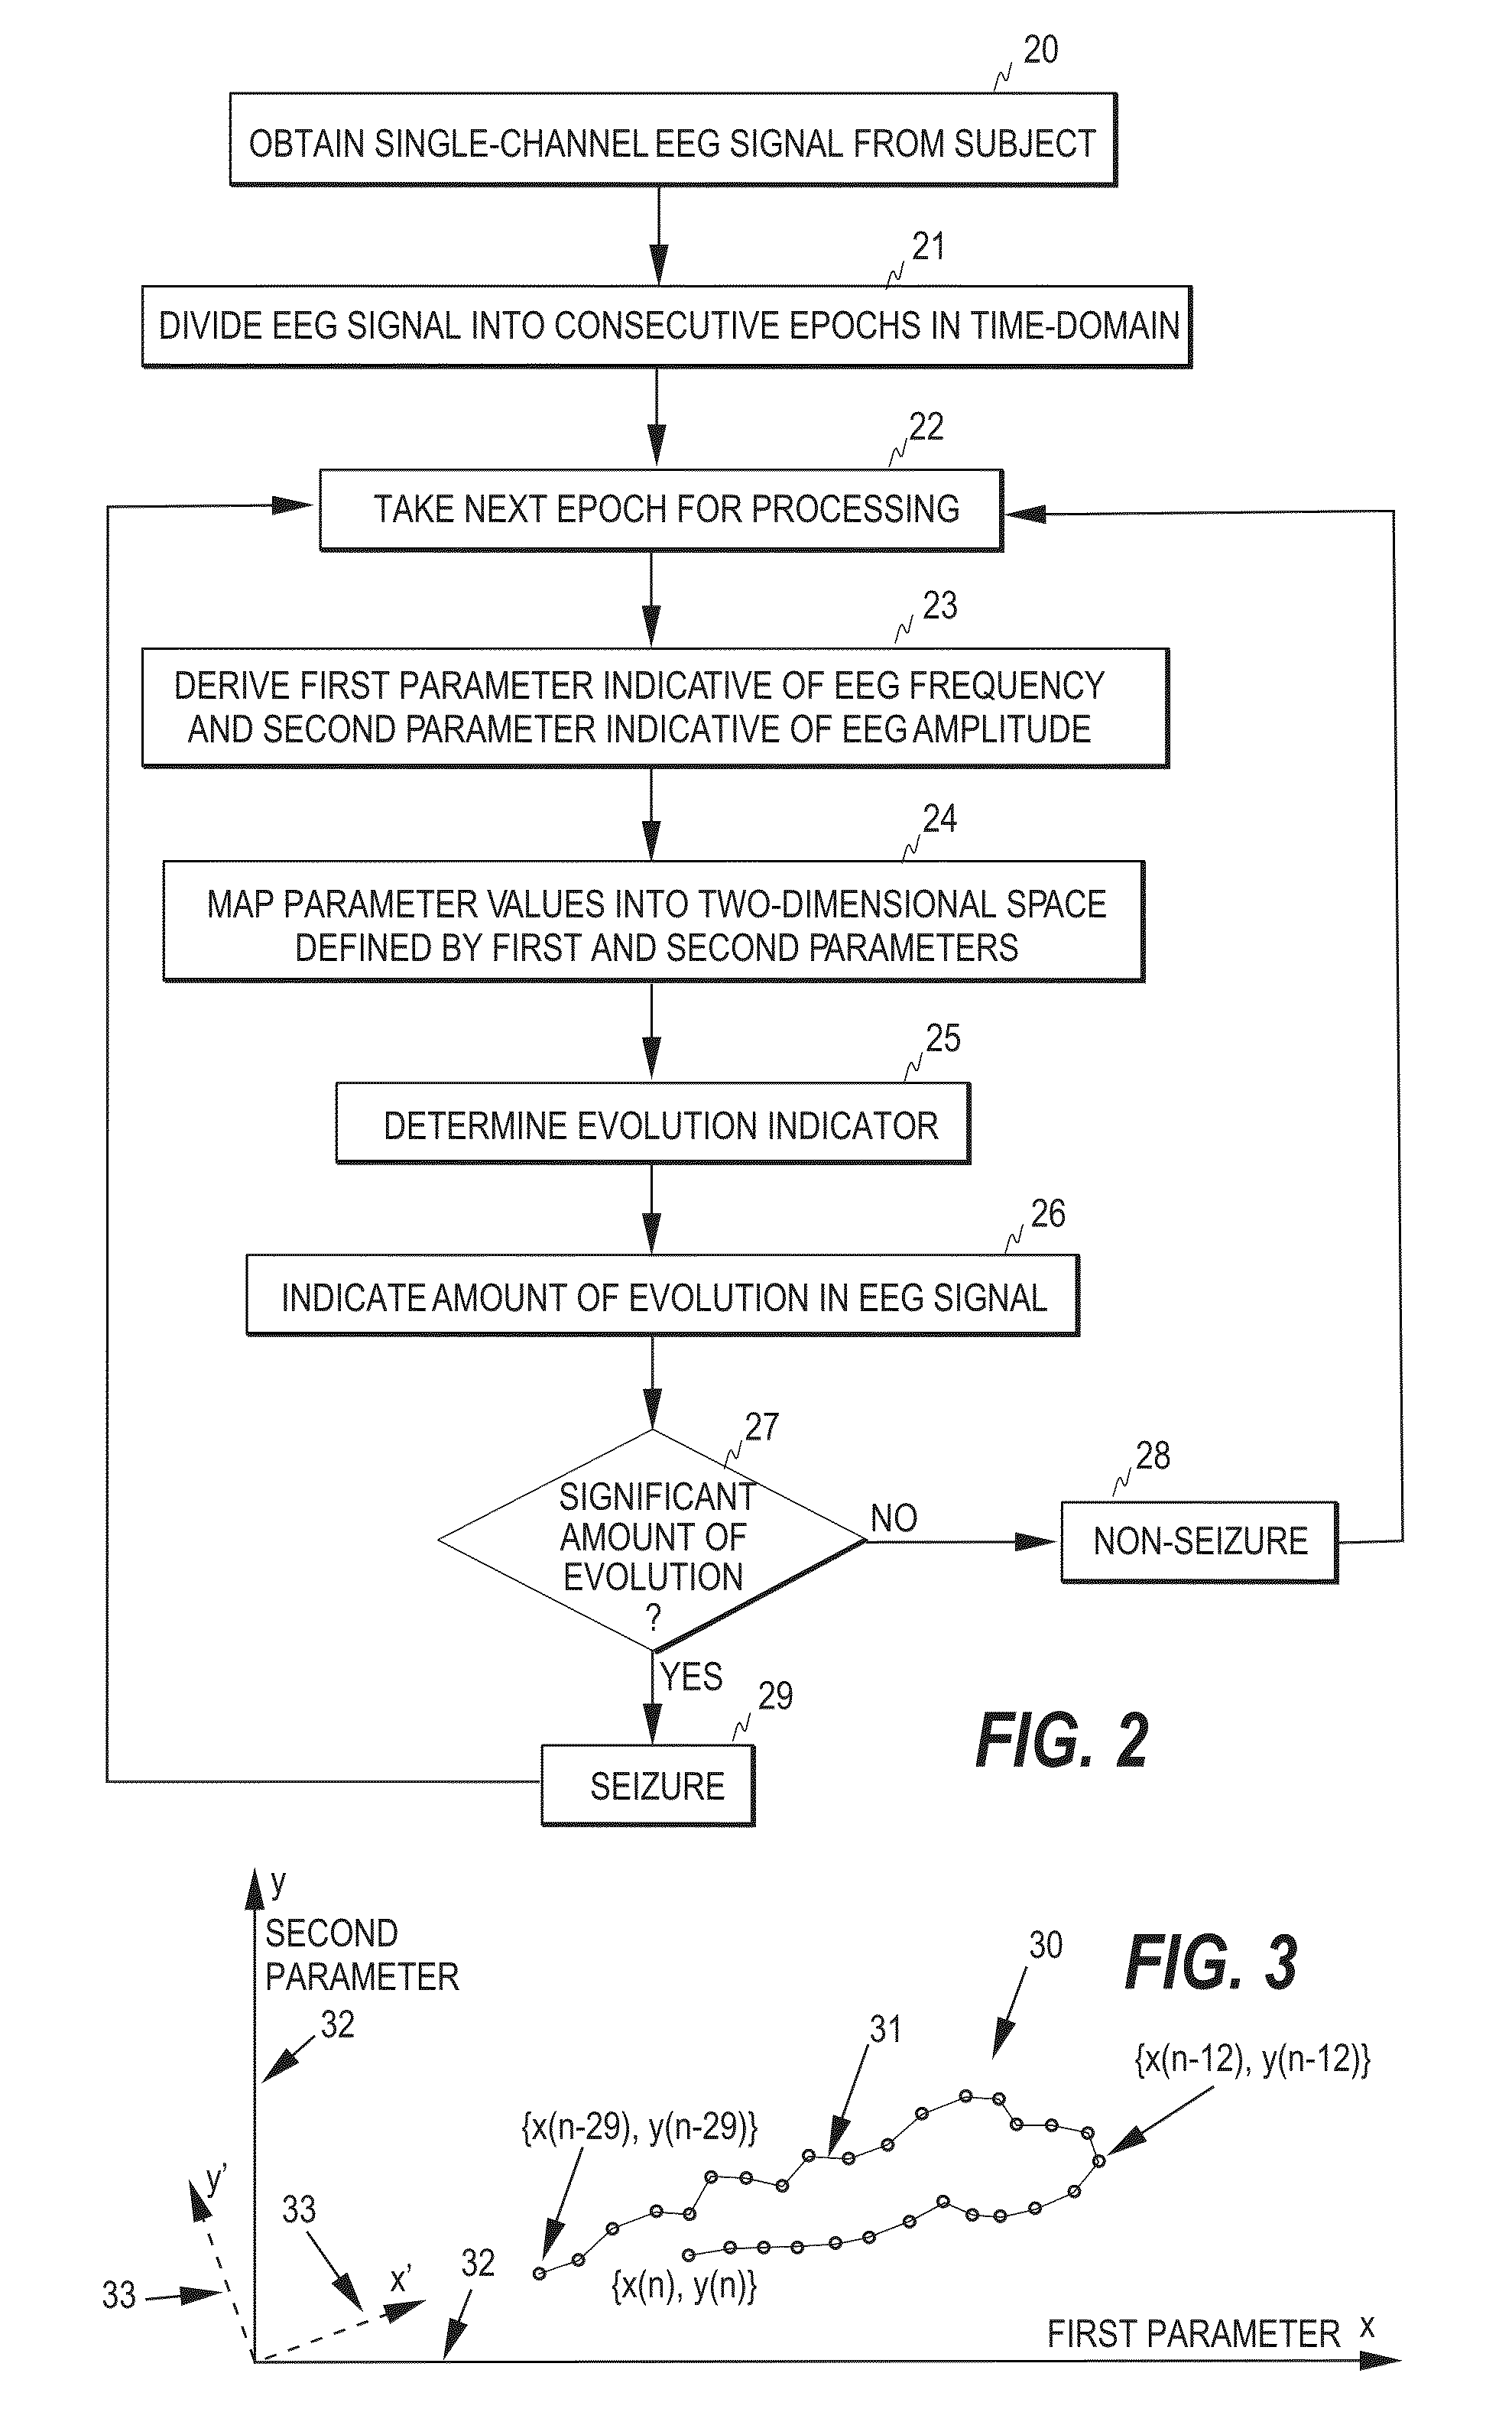 Method and apparatus for automatic seizure monitoring